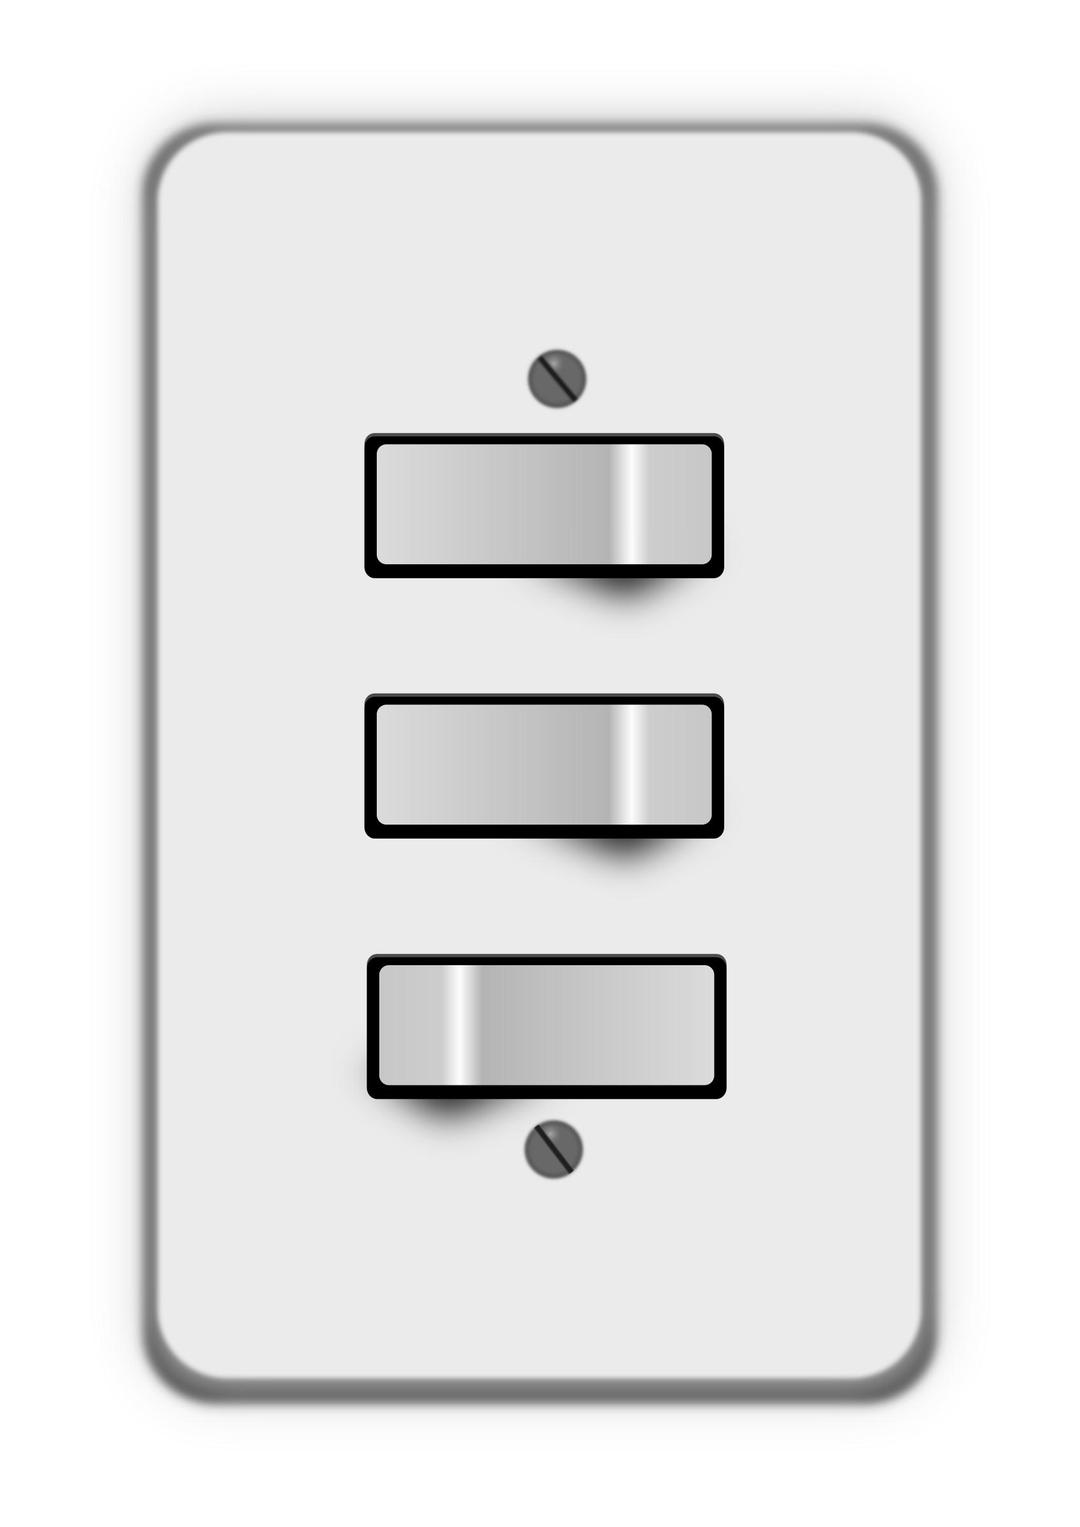 Light switch, 3 switches (two off) png transparent